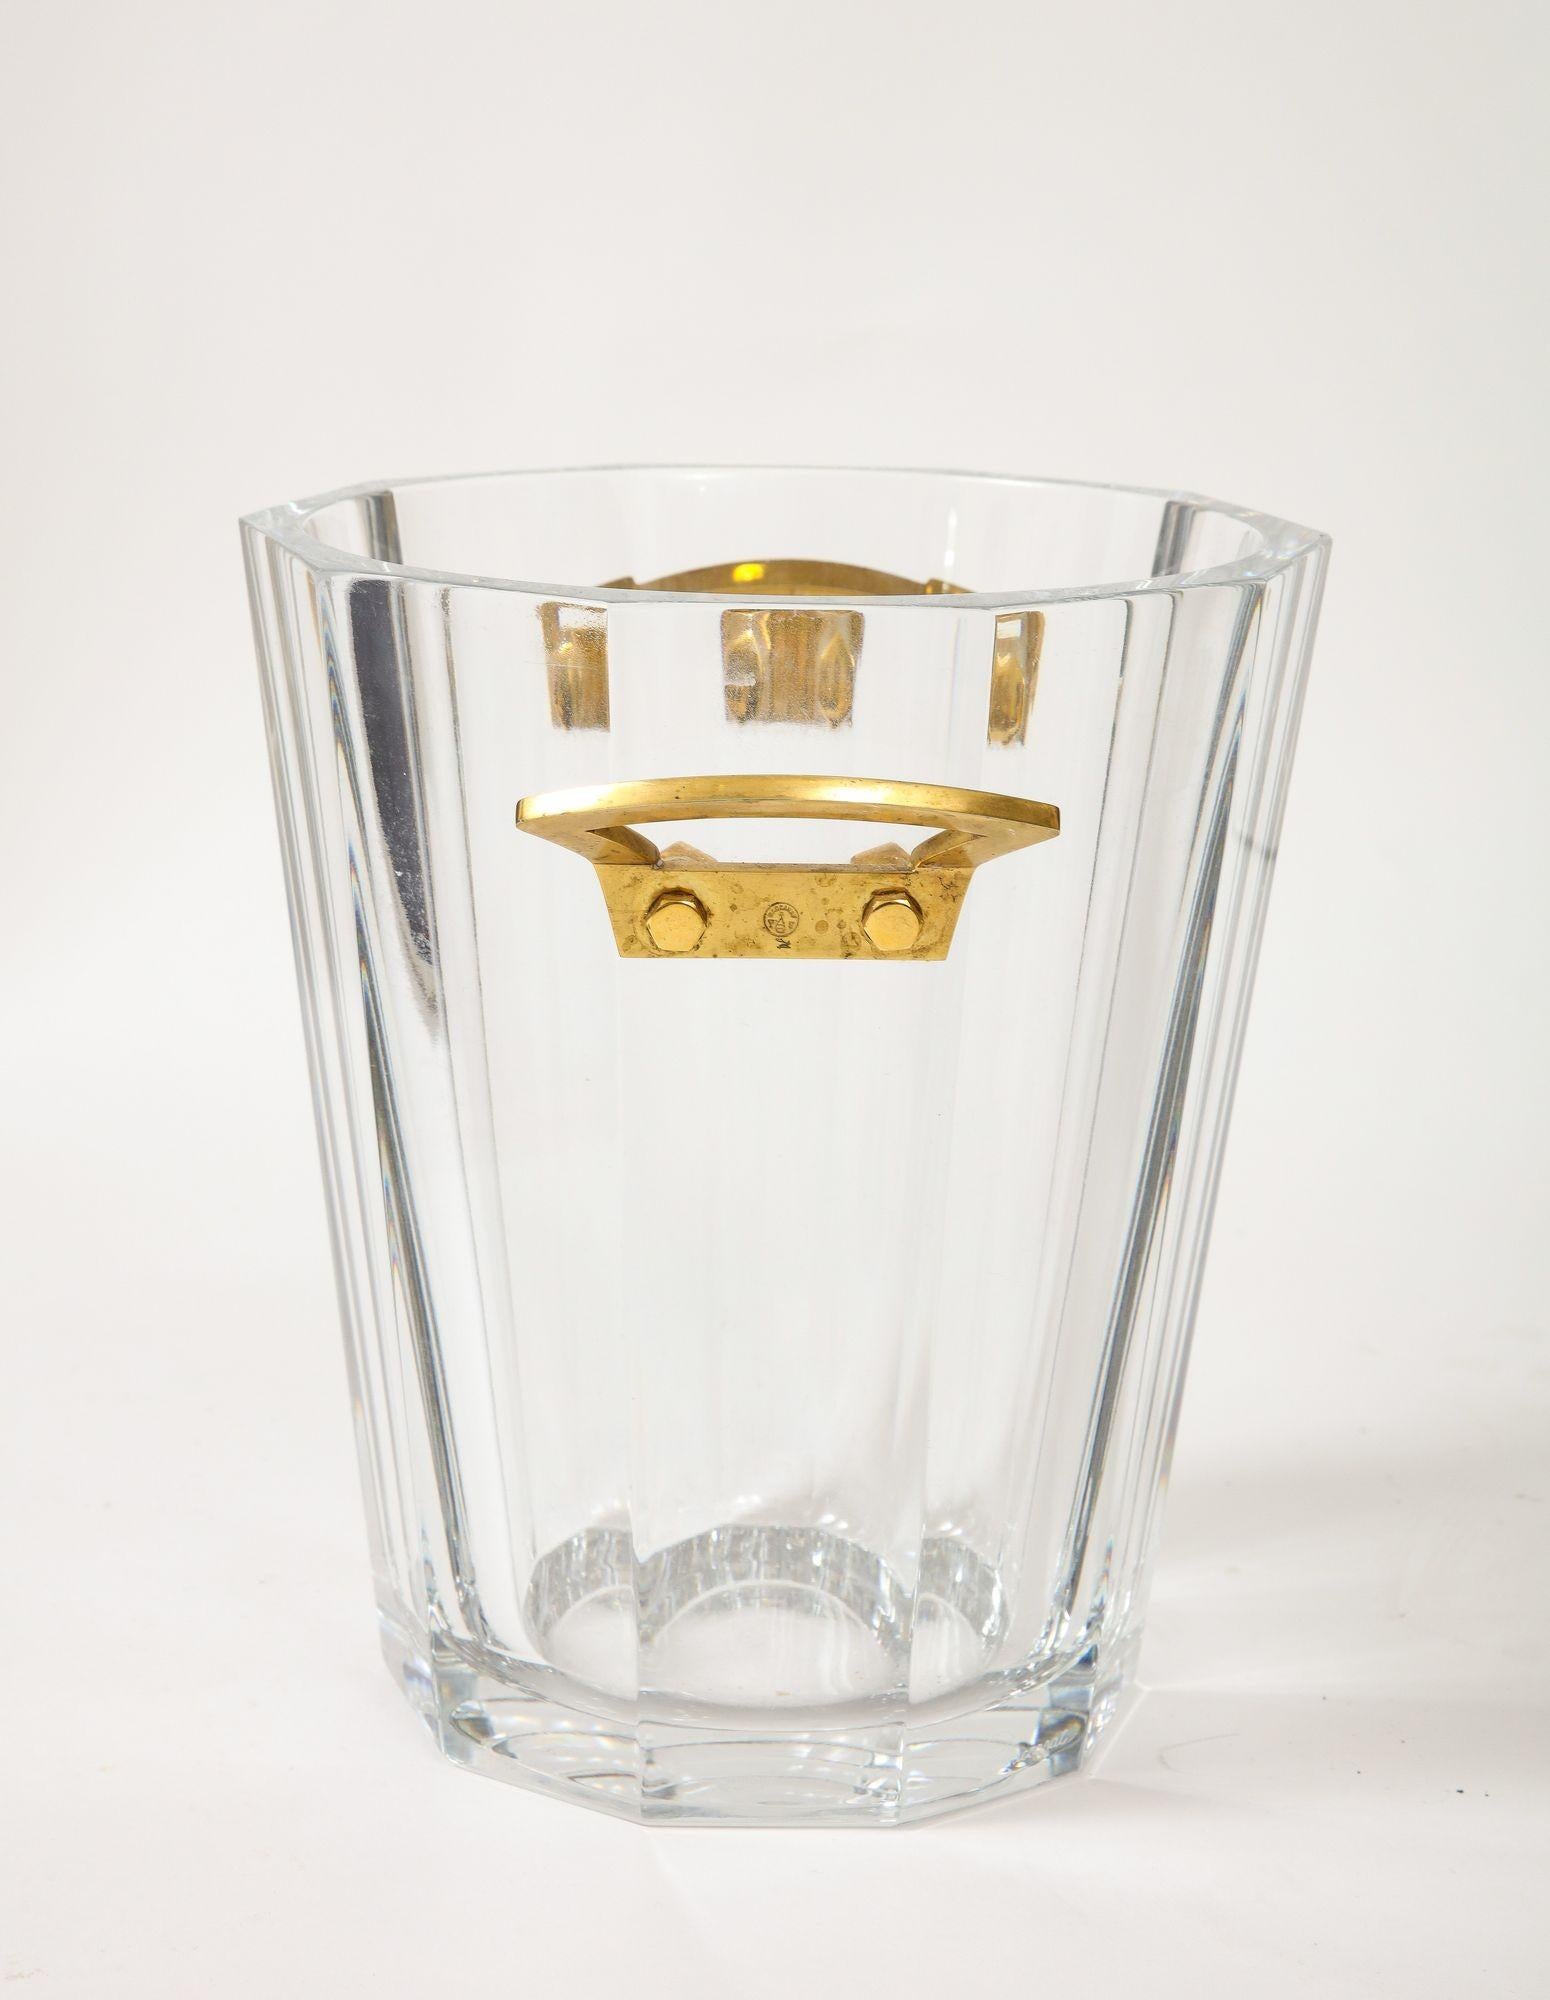 Art Deco Baccarat Fluted Crystal Ice Bucket with Gold plated Handles.